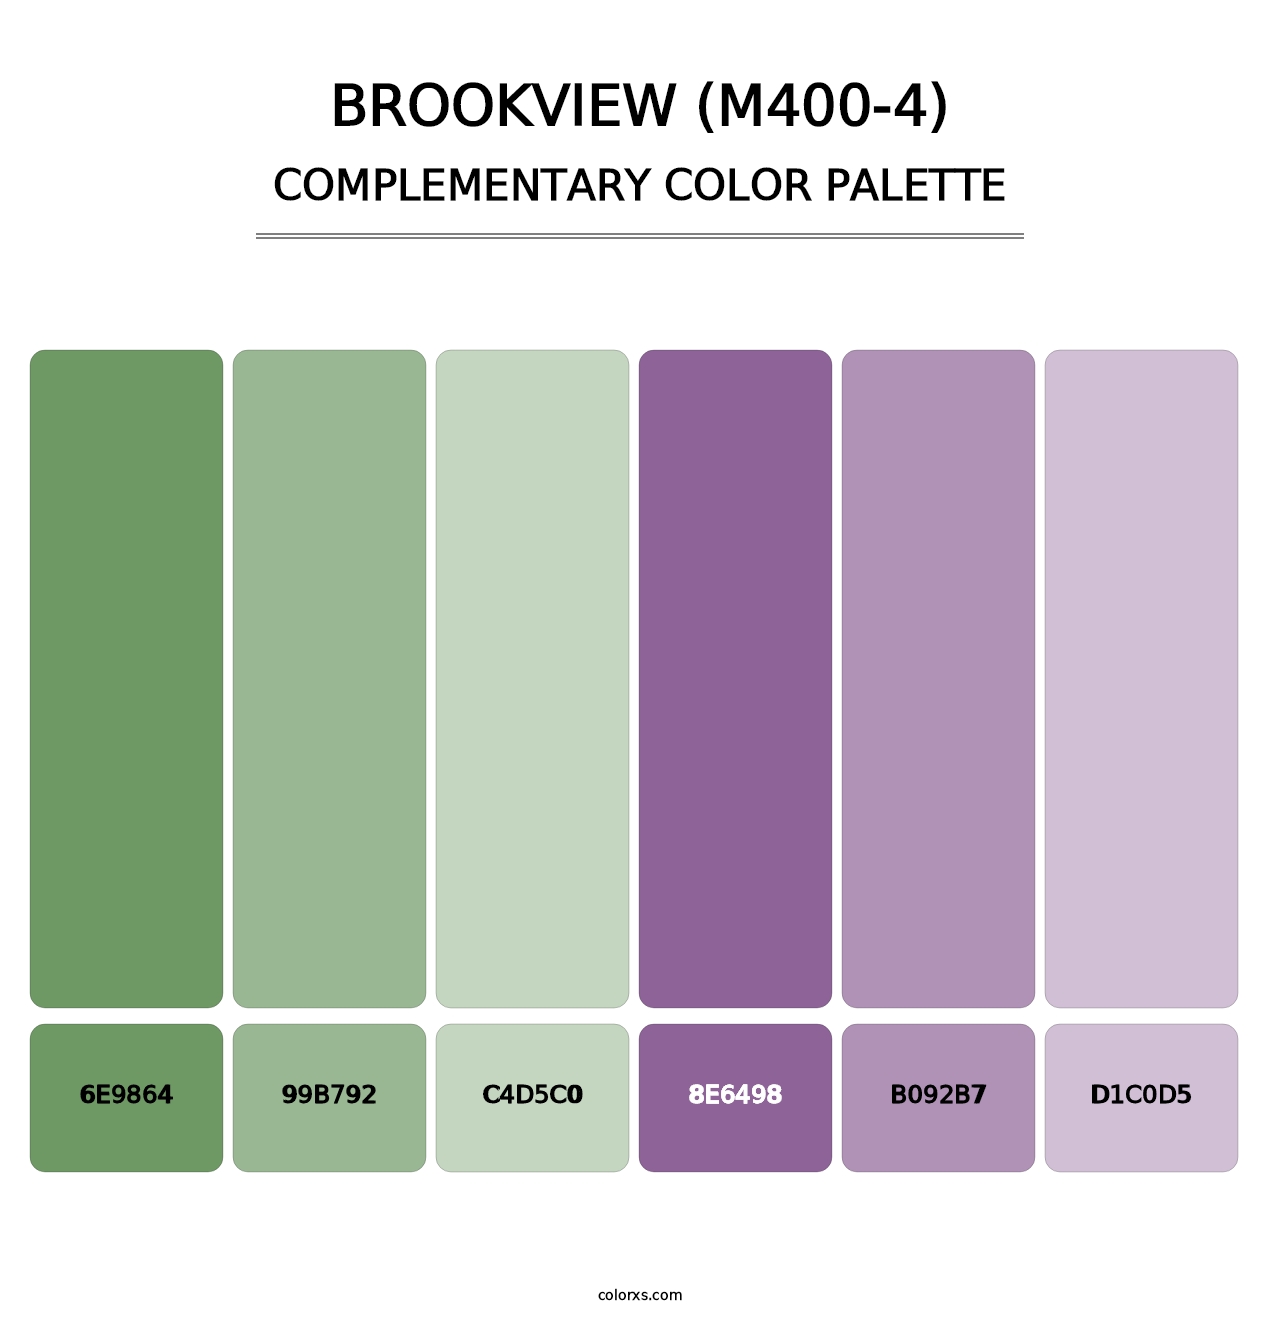 Brookview (M400-4) - Complementary Color Palette